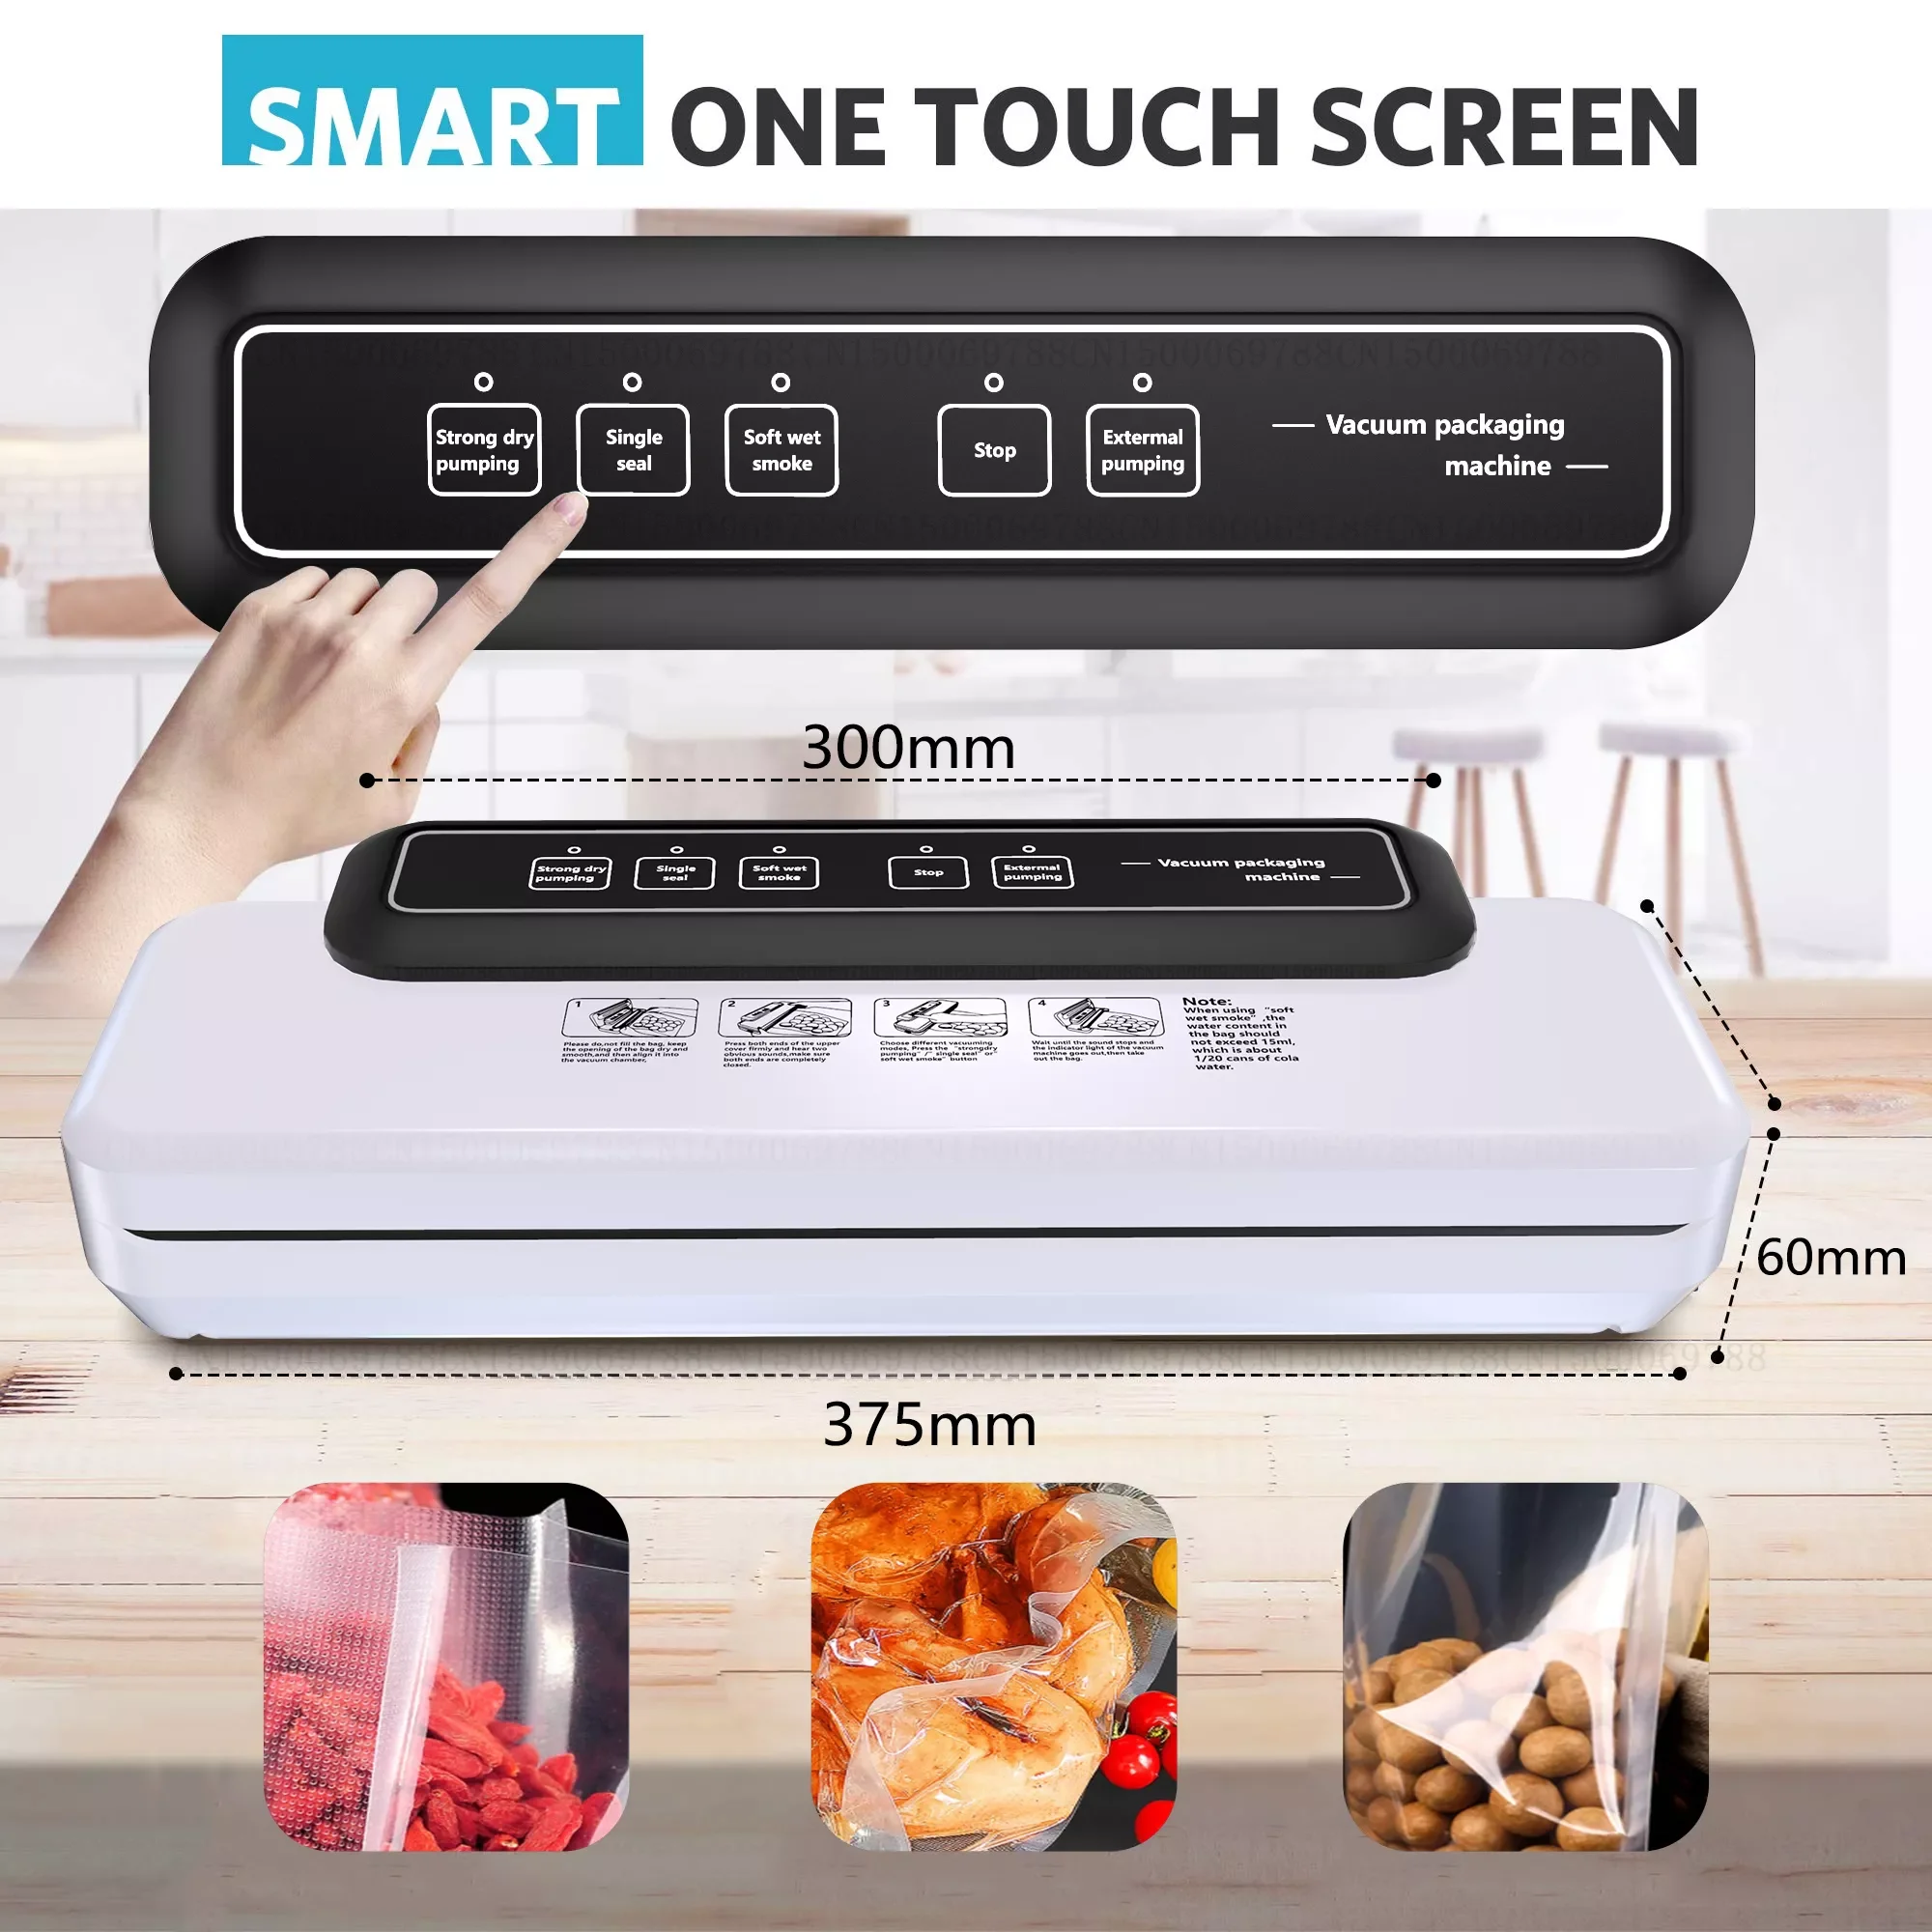 Kitchen Vacuum Sealer Strong Sous Pumping Degasser Sealing Machine Cans Vacuum Packer For Food Storage Dry & Moist Modes Pac enlarge